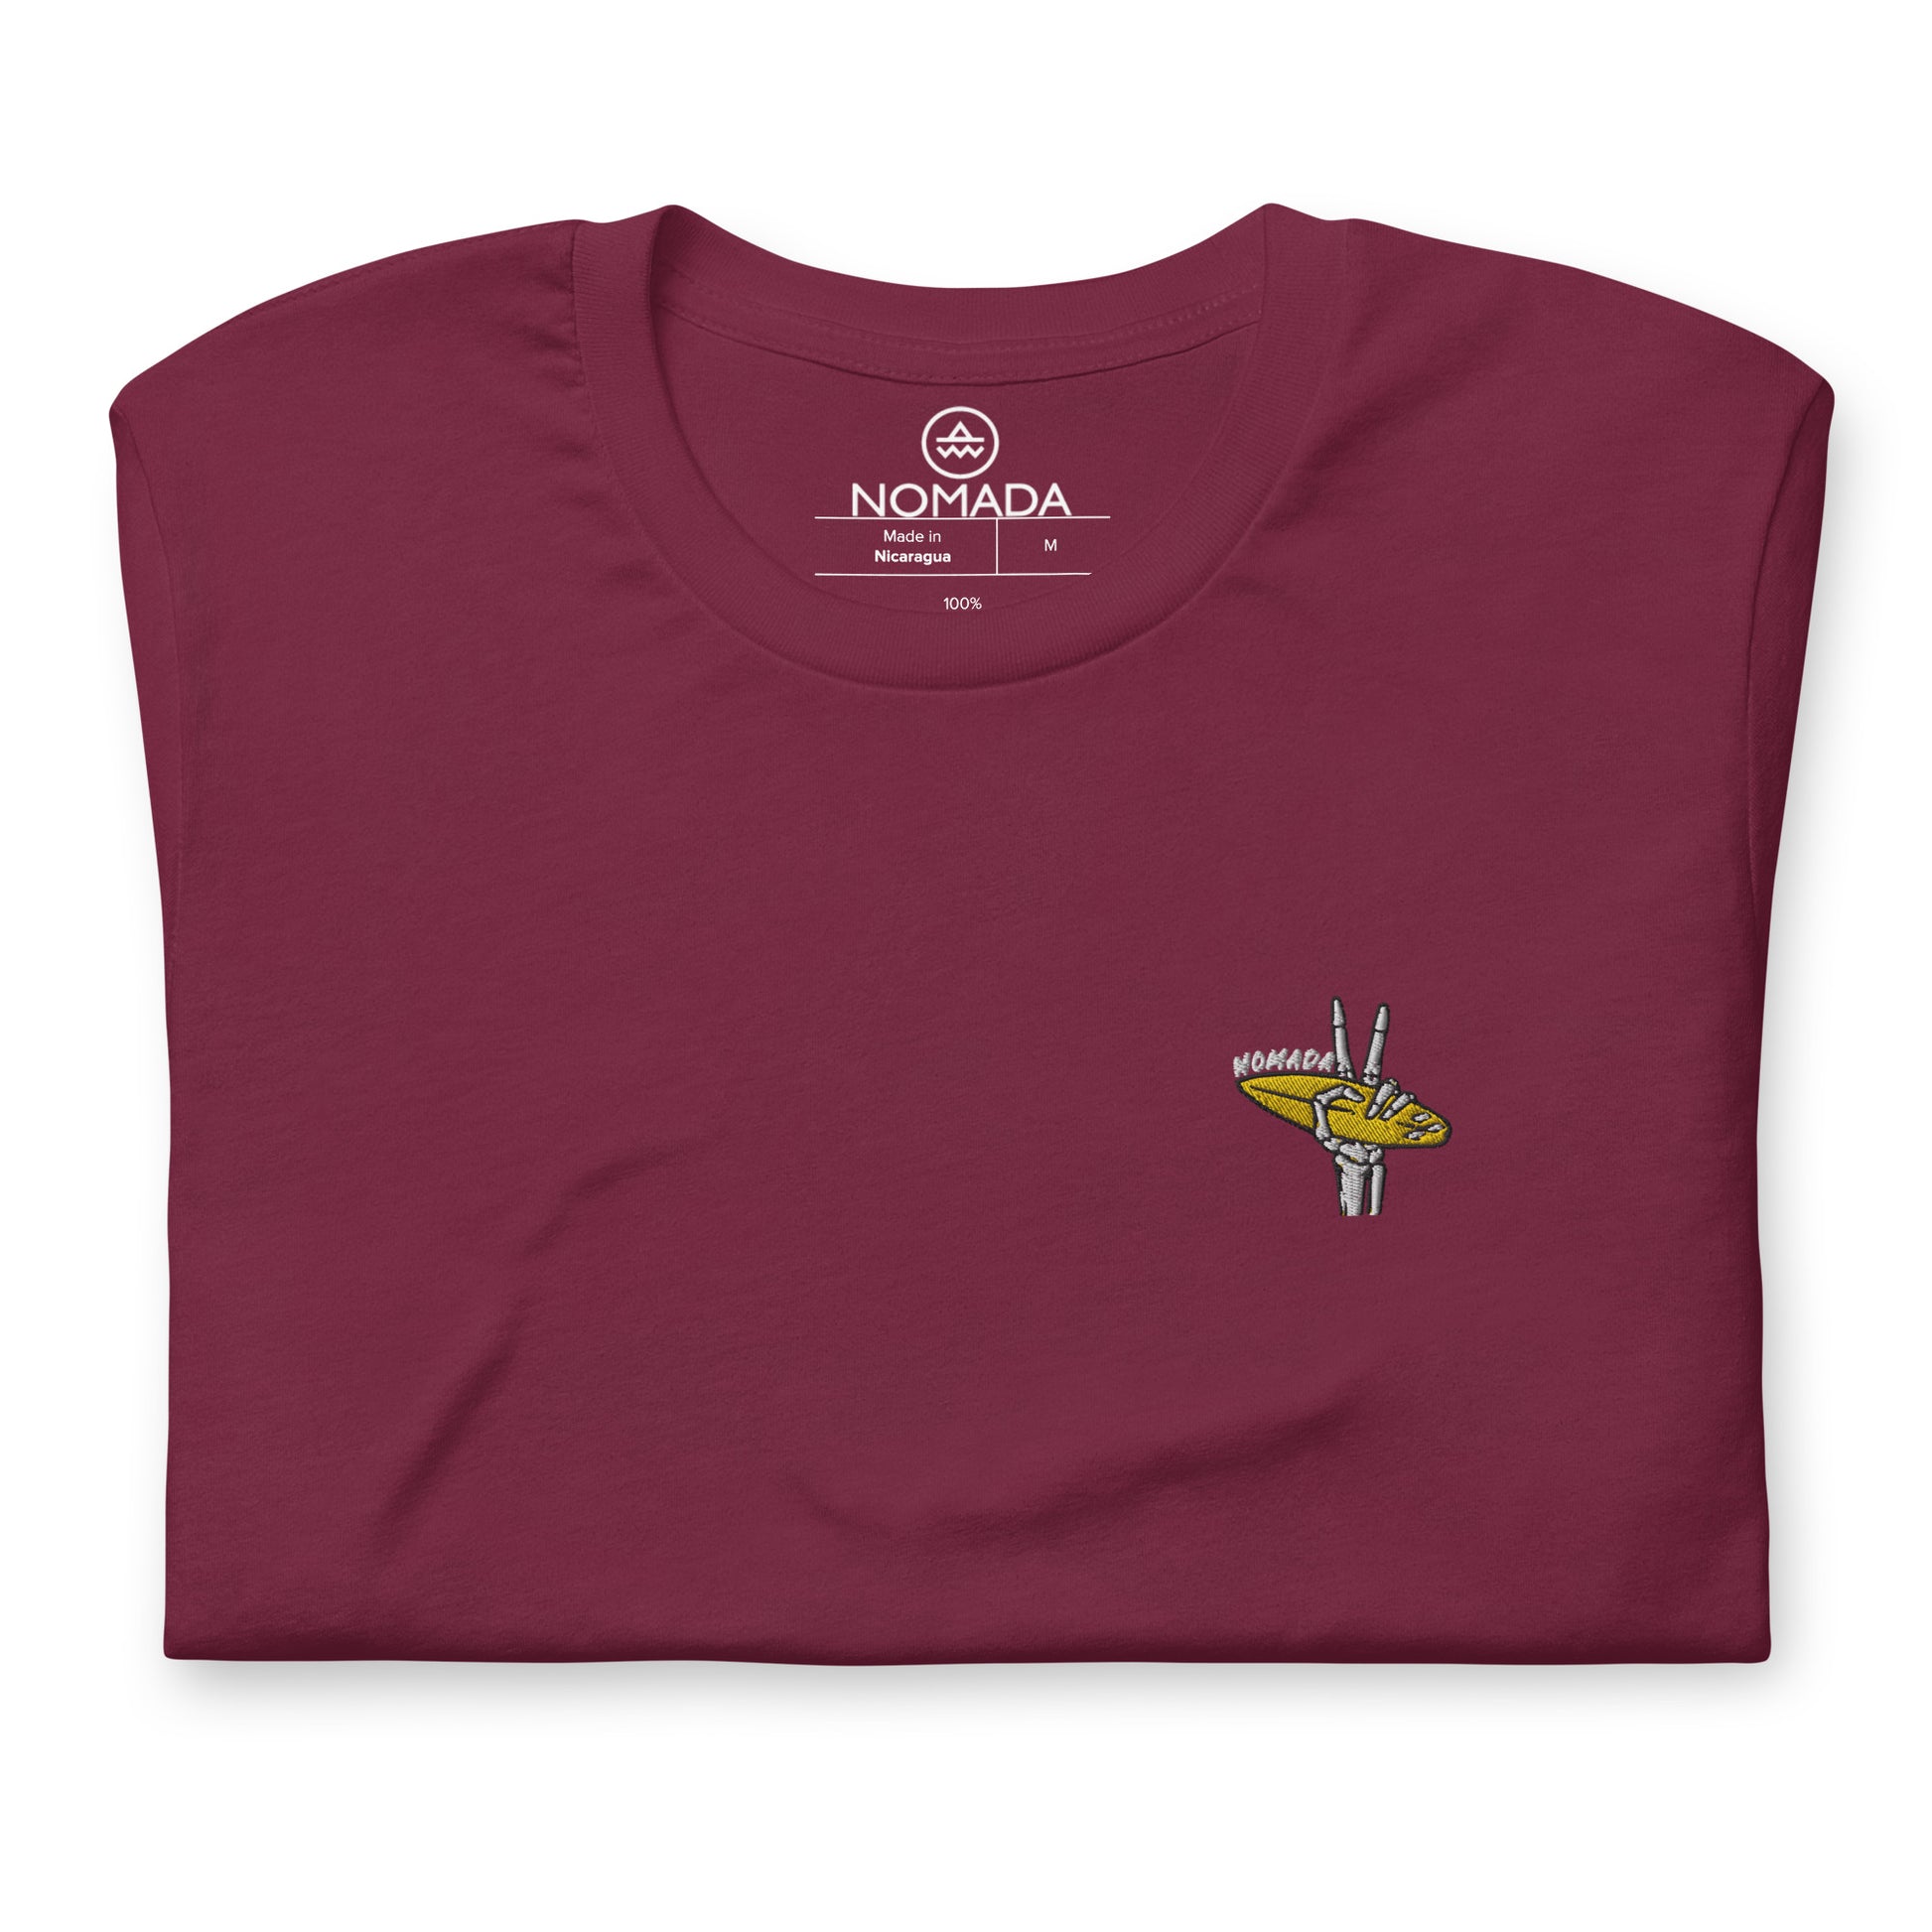 NOMADA Skeleton Hand Showing Peach Sign while holding a Surfboard embroidered T-Shirt, Maroon color shirt